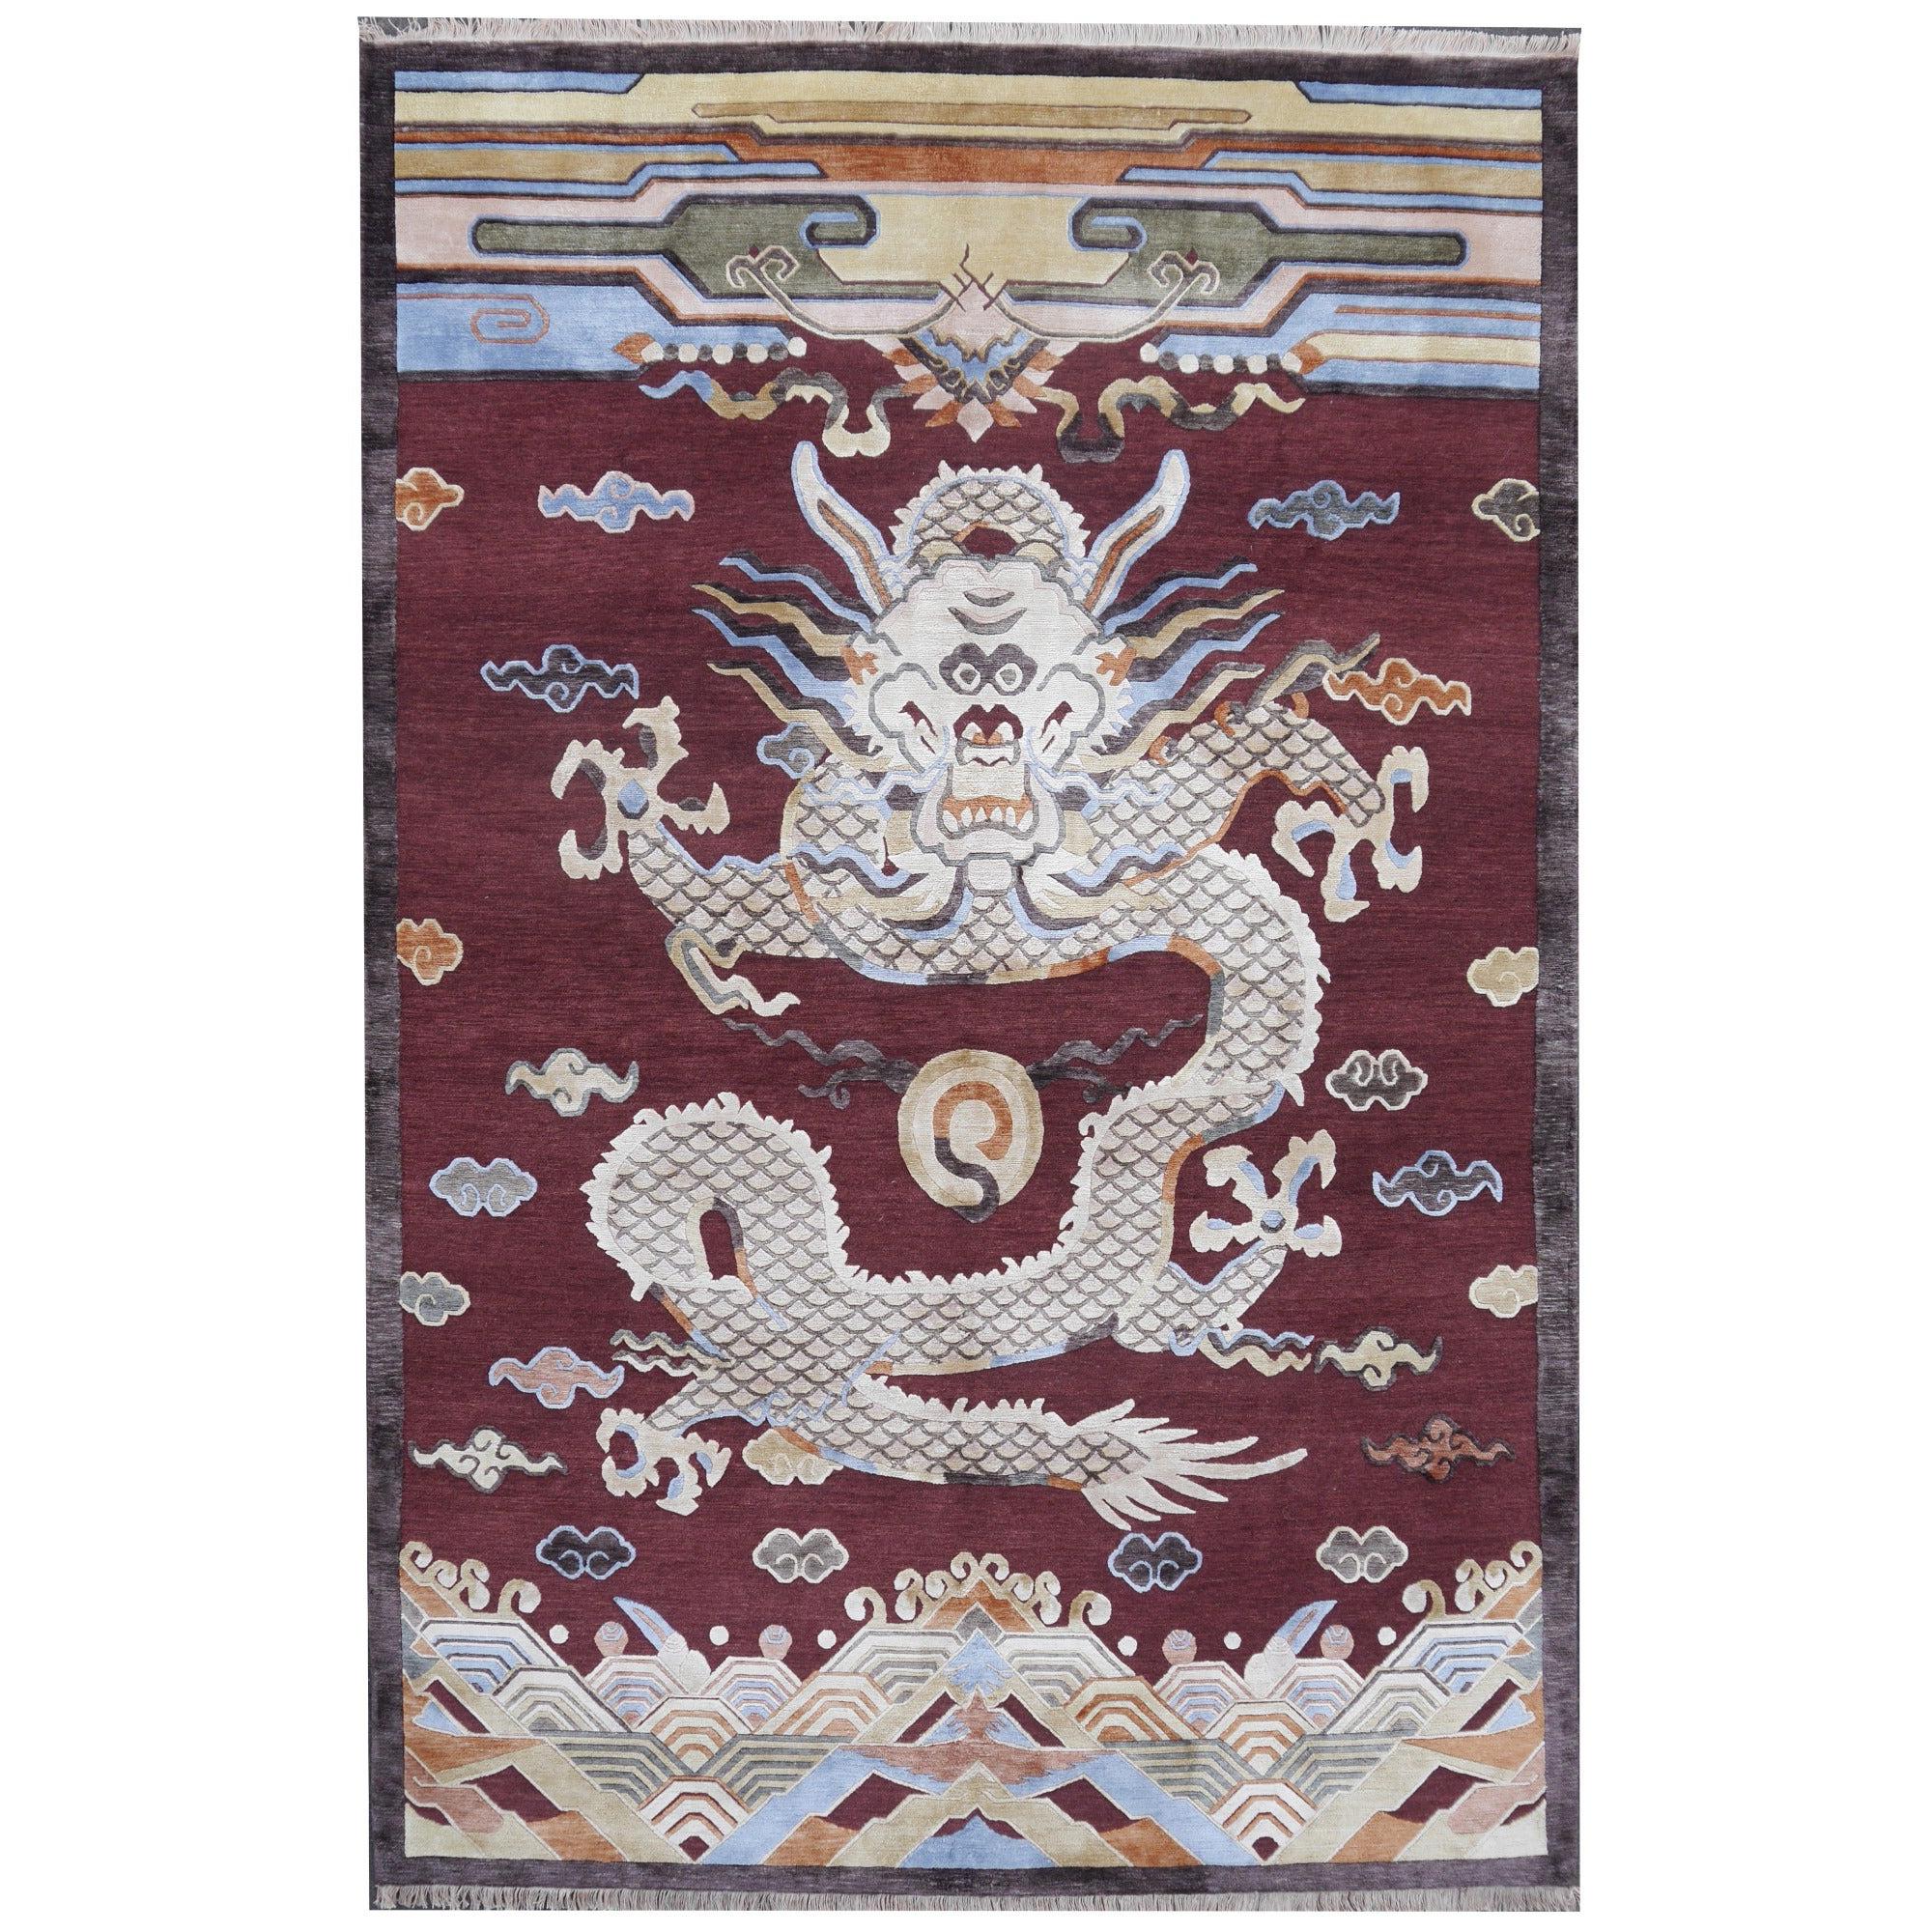 Dragon Design Rug Wool and Silk in Style of Chinese Kansu Carpets